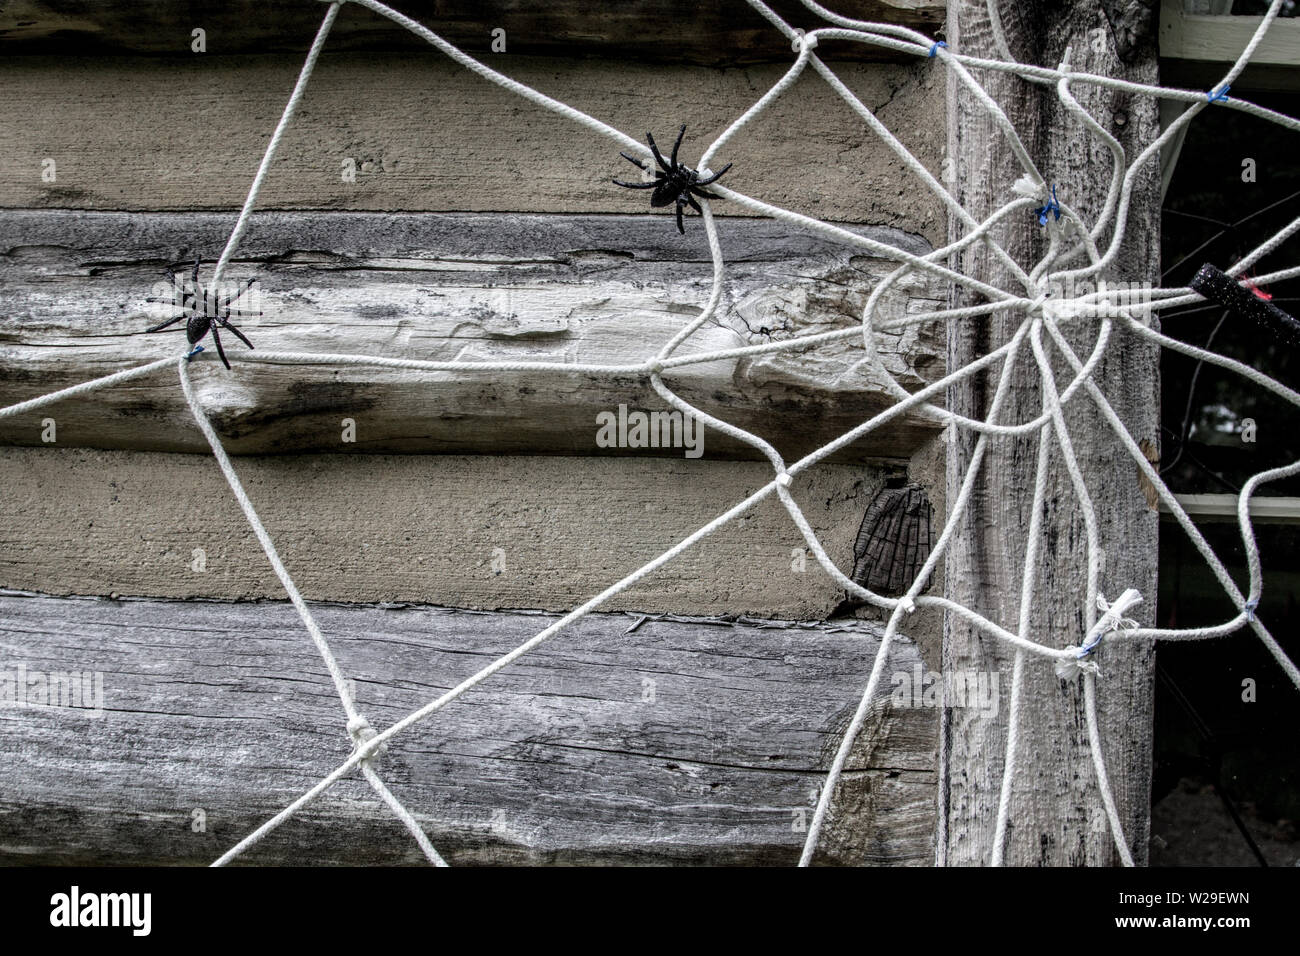 Homemade Do It Yourself Halloween Decoration. Spider web made of old clothesline on exterior of home Stock Photo